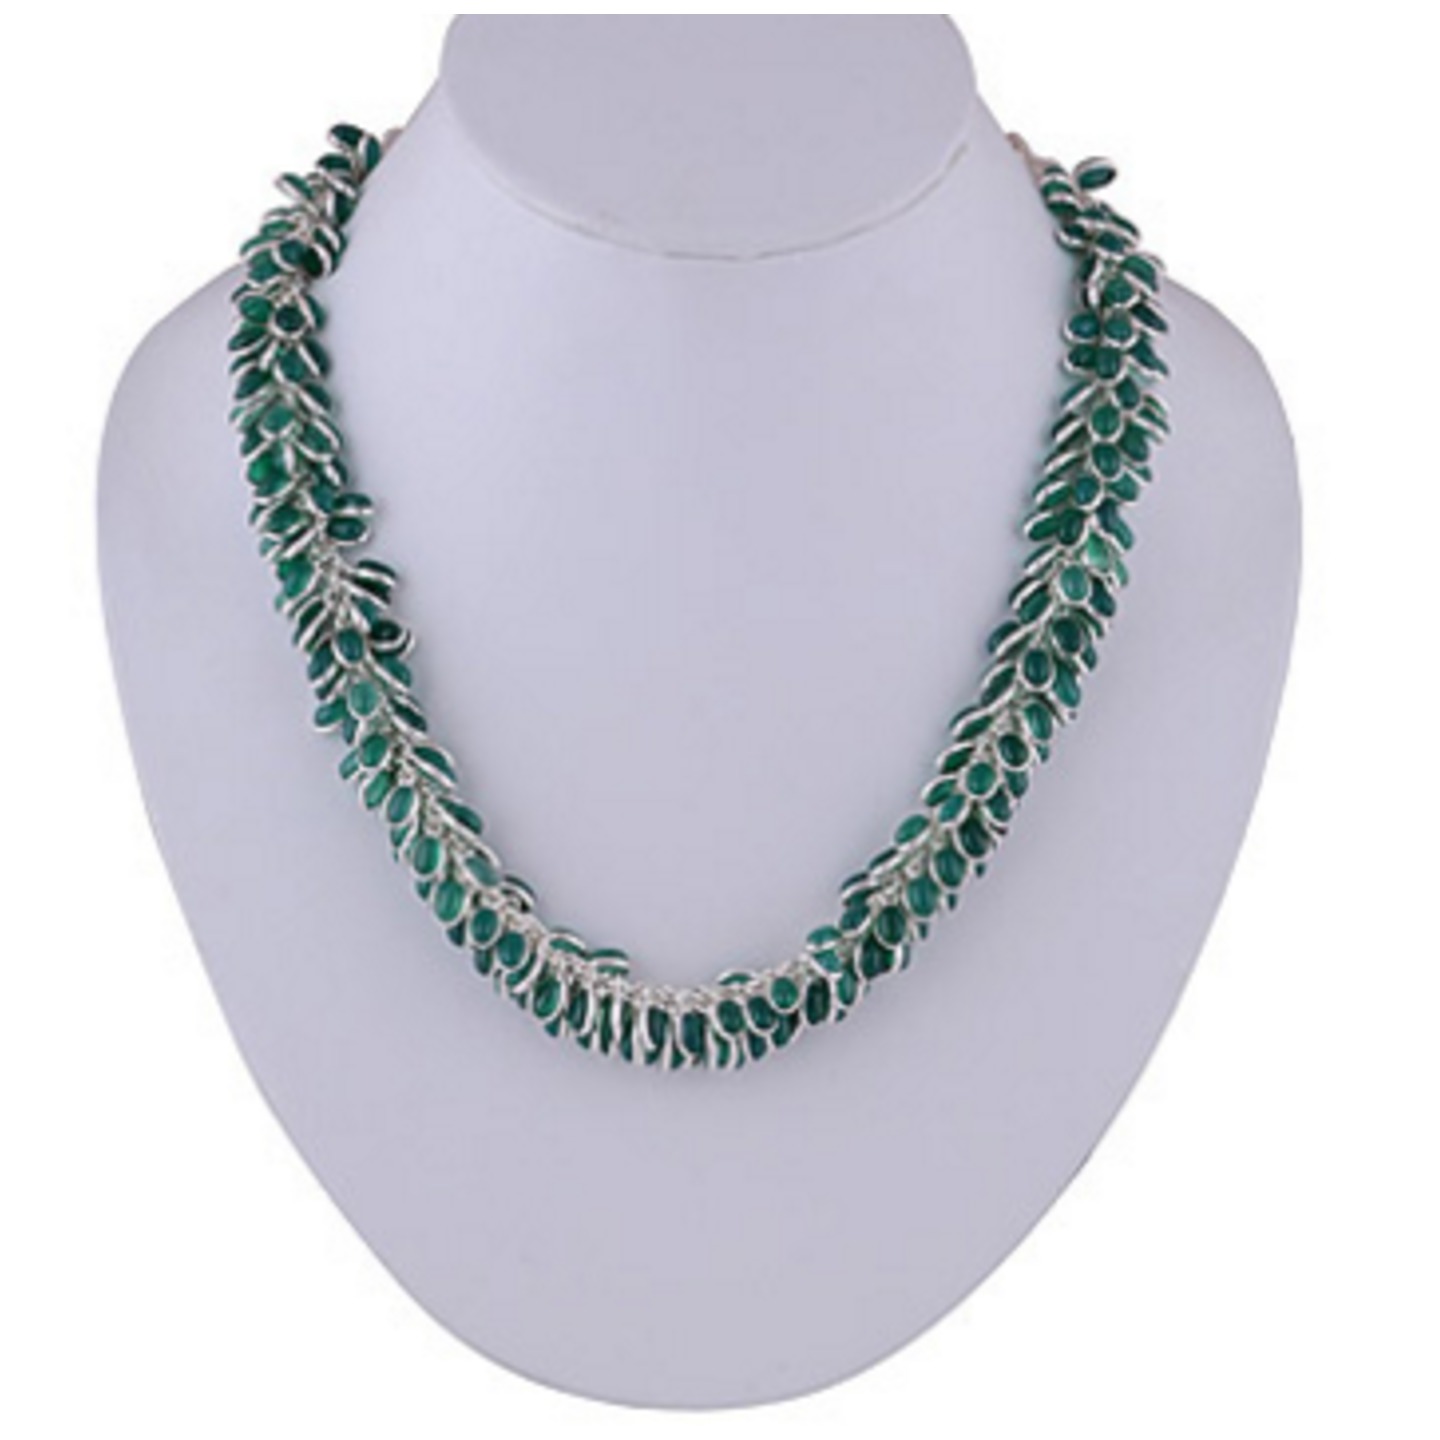 The Green Onyx Silver Necklace